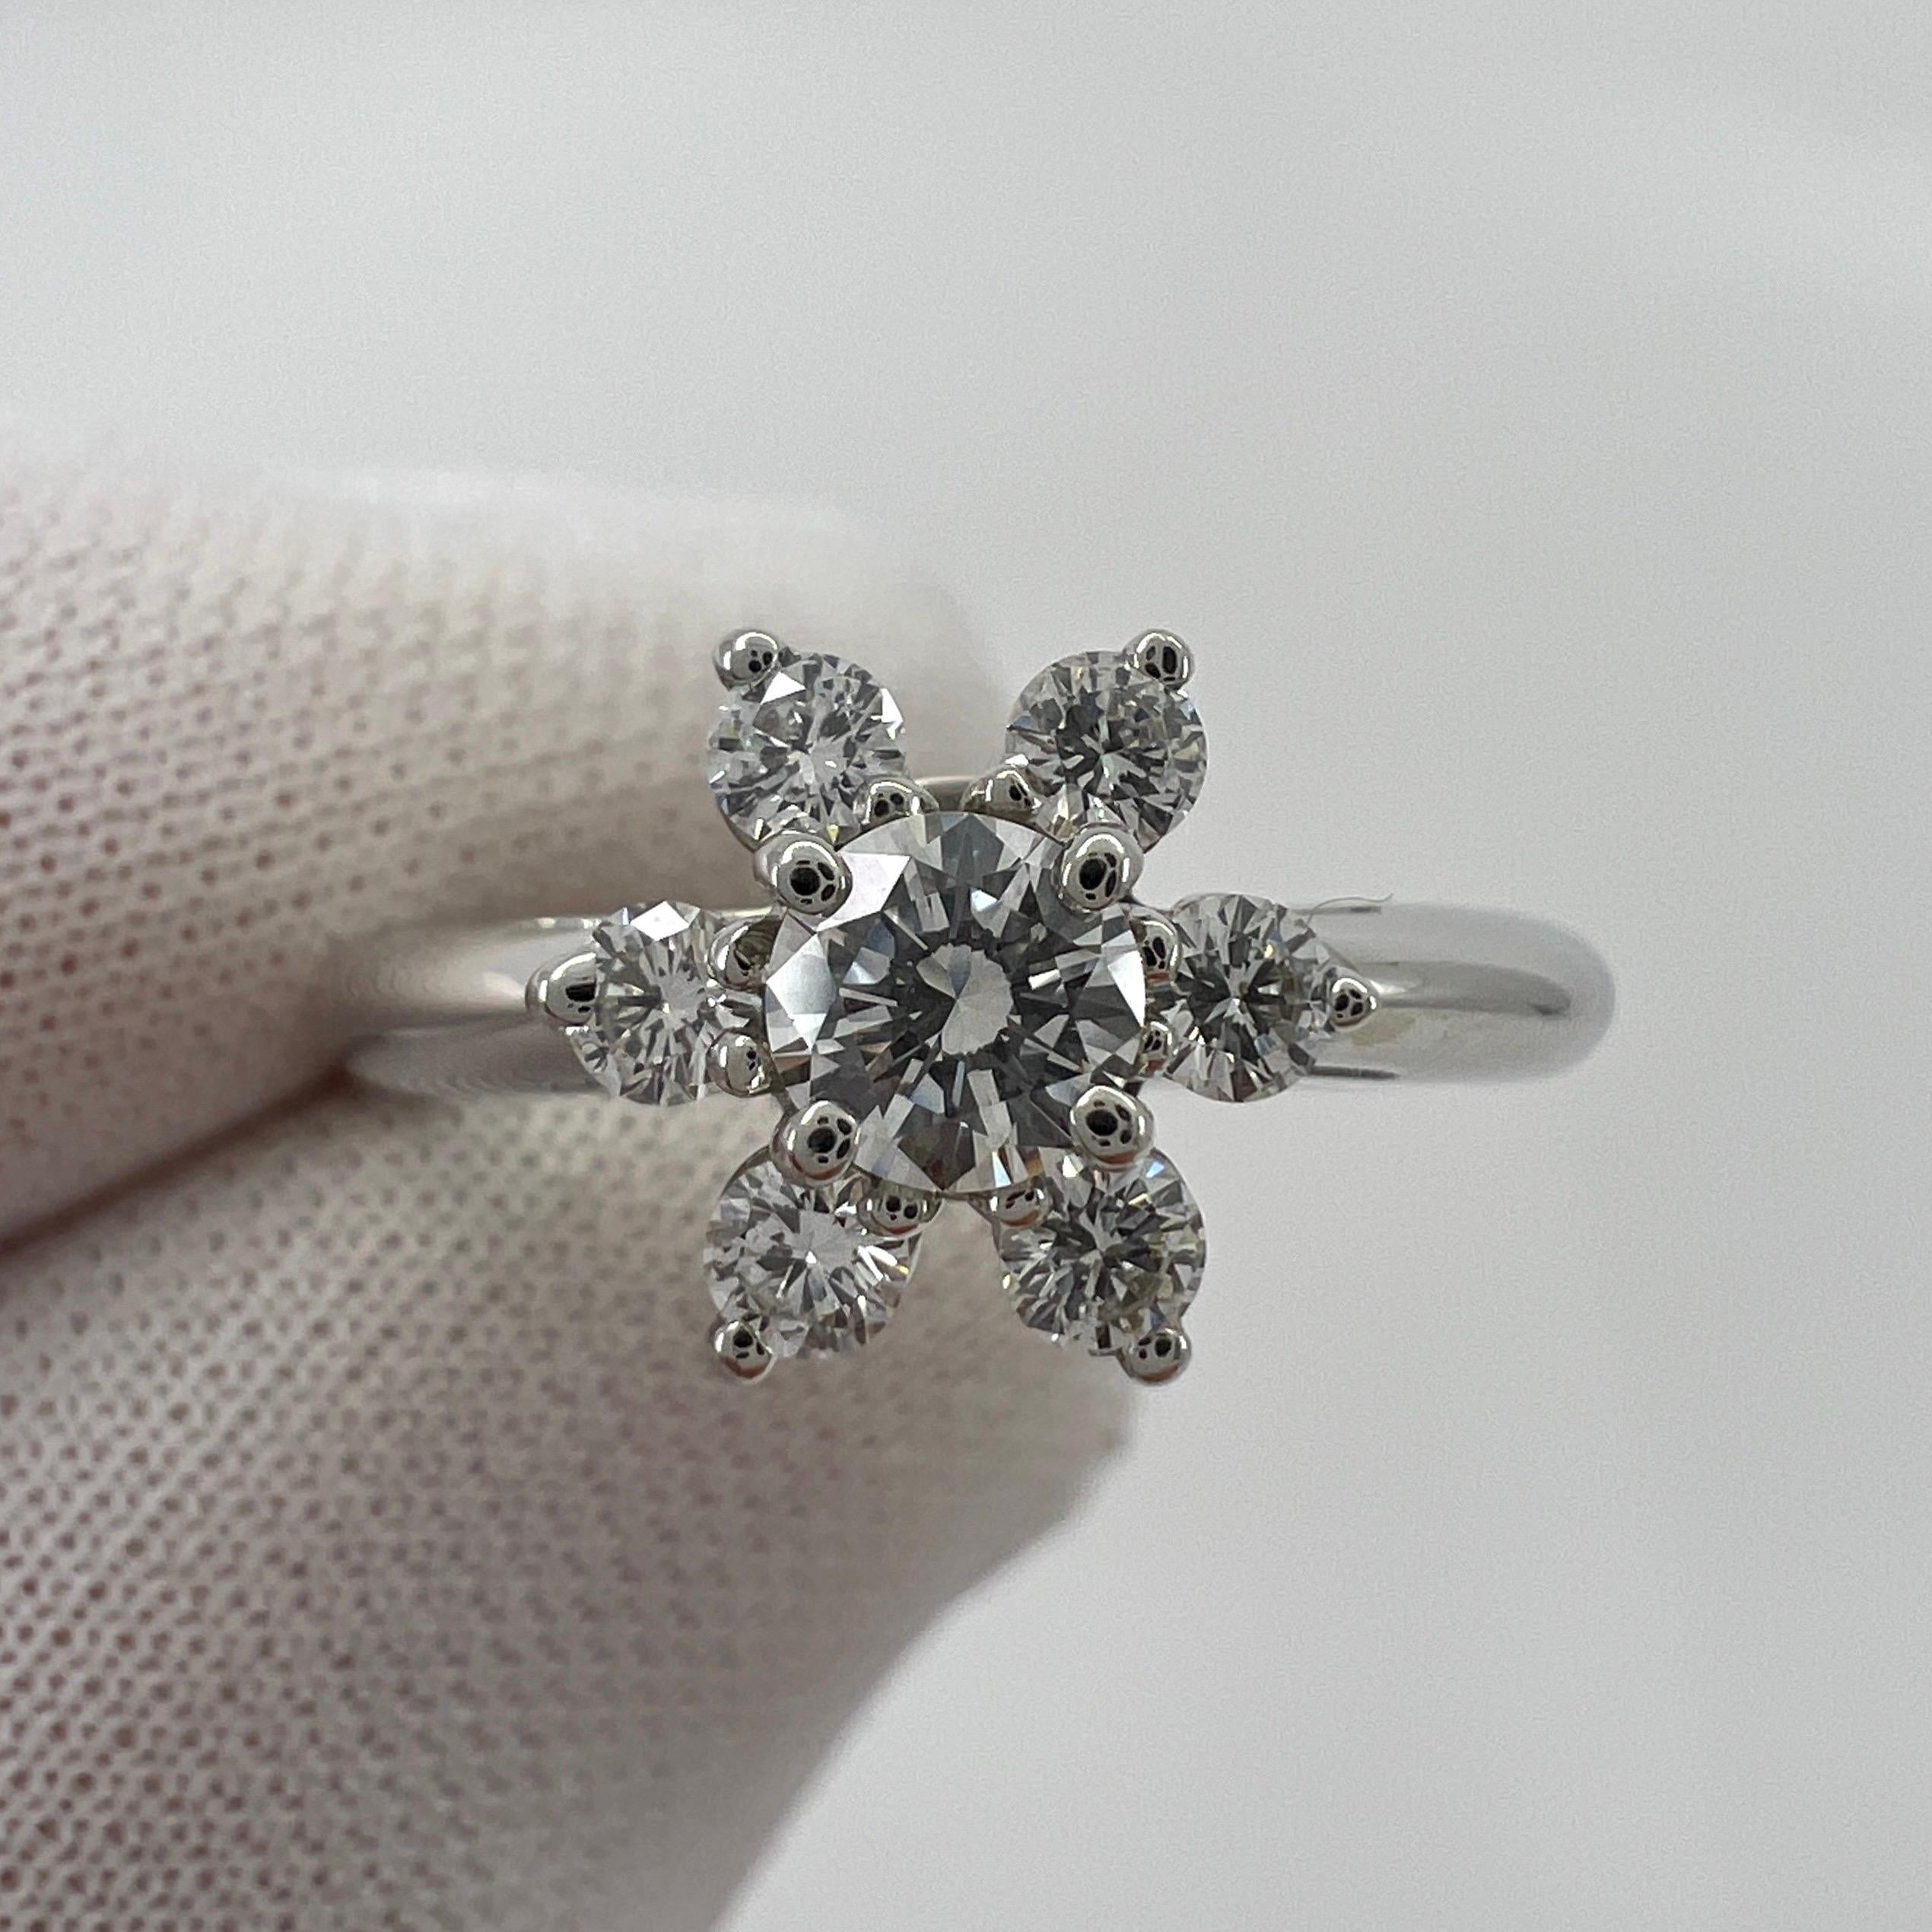 Vintage Tiffany & Co. Natural Diamond 950 Platinum Flower 'Buttercup' Ring.

A beautifully made platinum cluster ring set with a stunning 3.8mm round cut natural diamond centre stone. Superb colour, clarity and cut. VVS1 clarity E/F